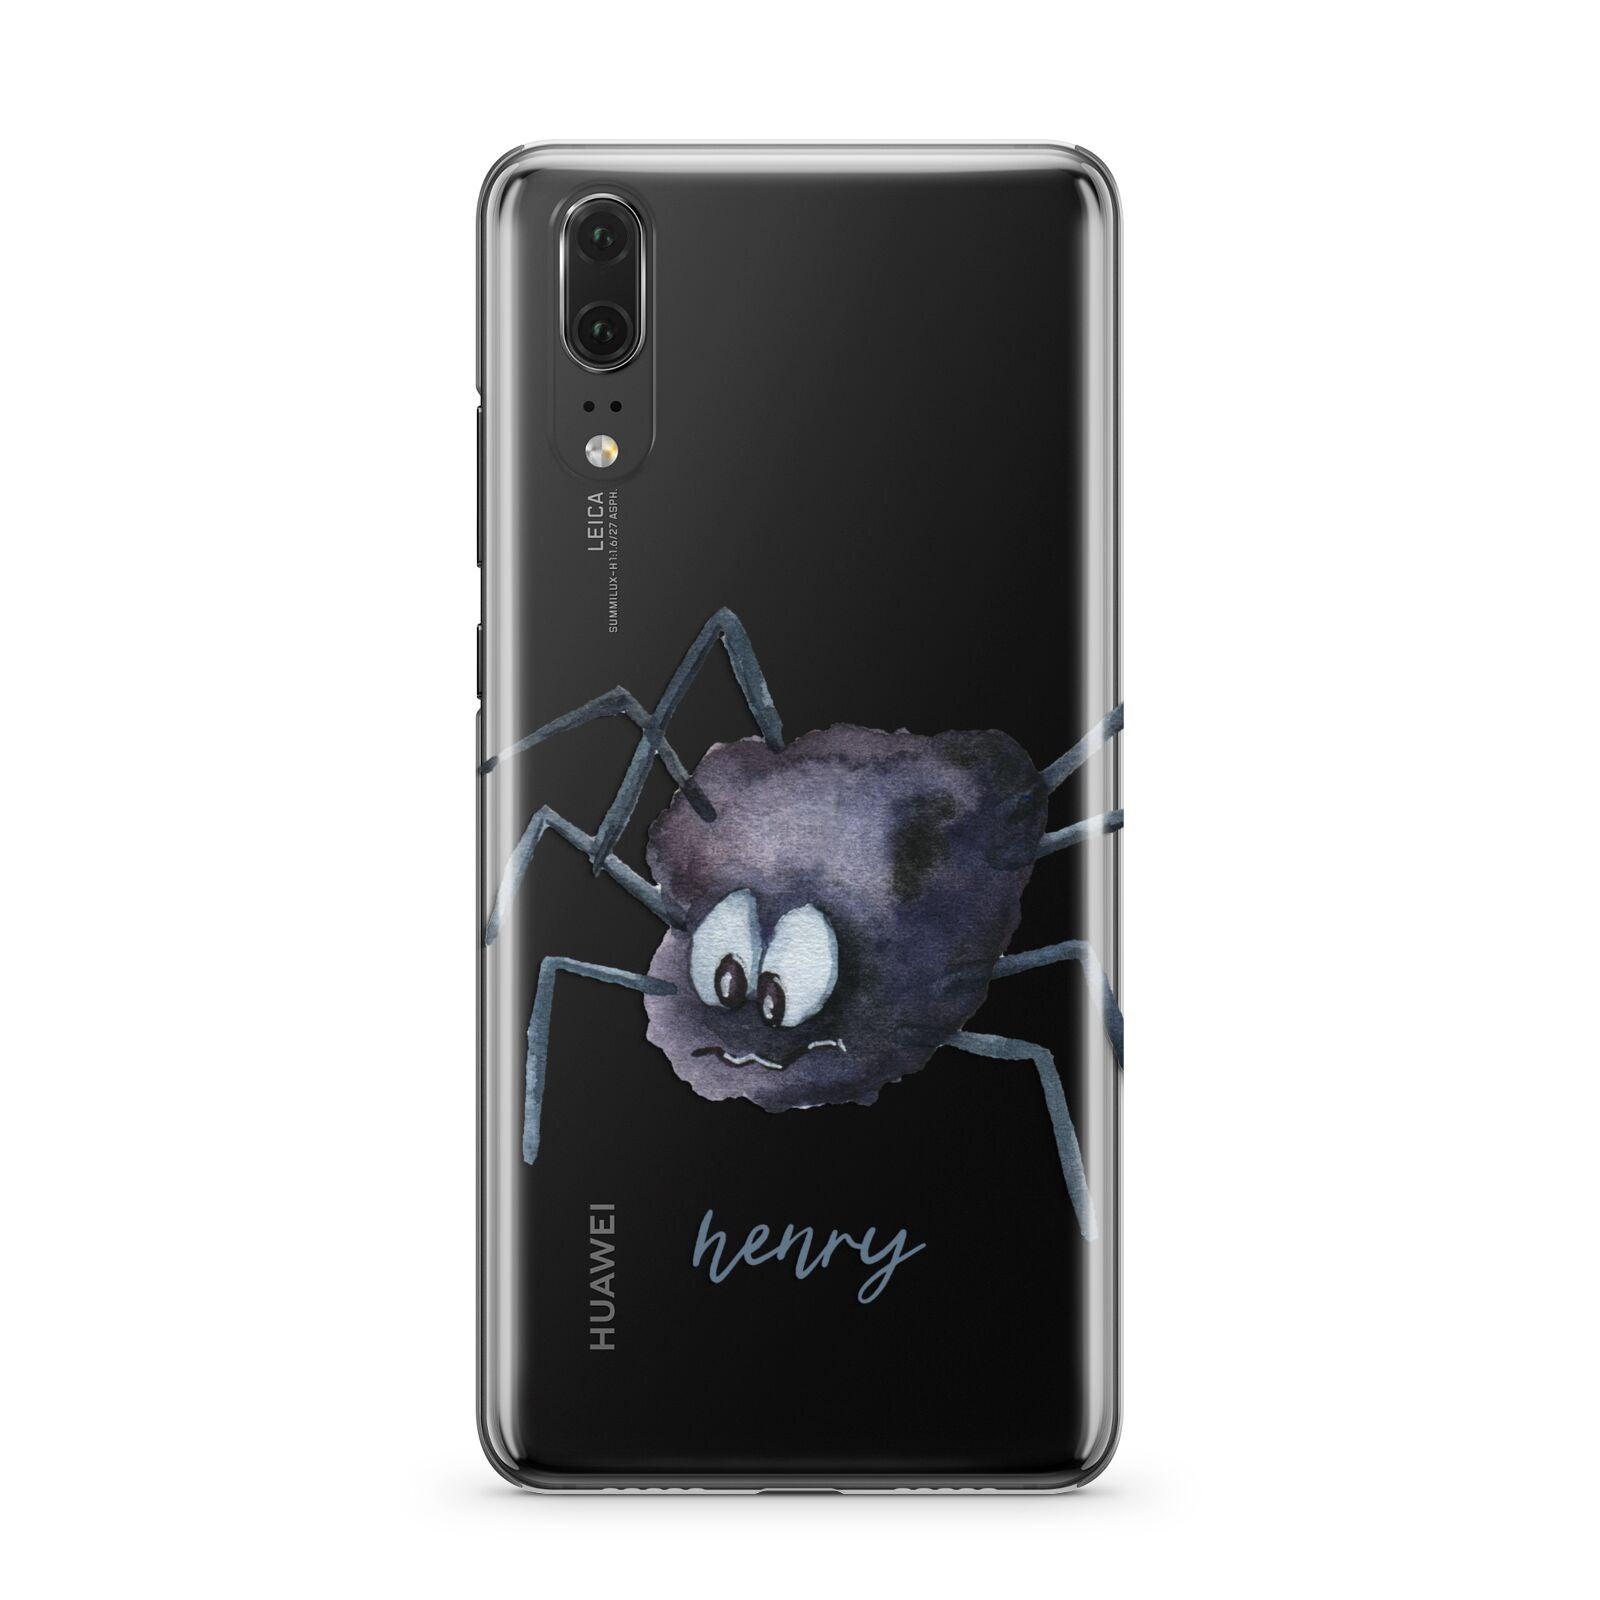 Scared Spider Personalised Huawei P20 Phone Case